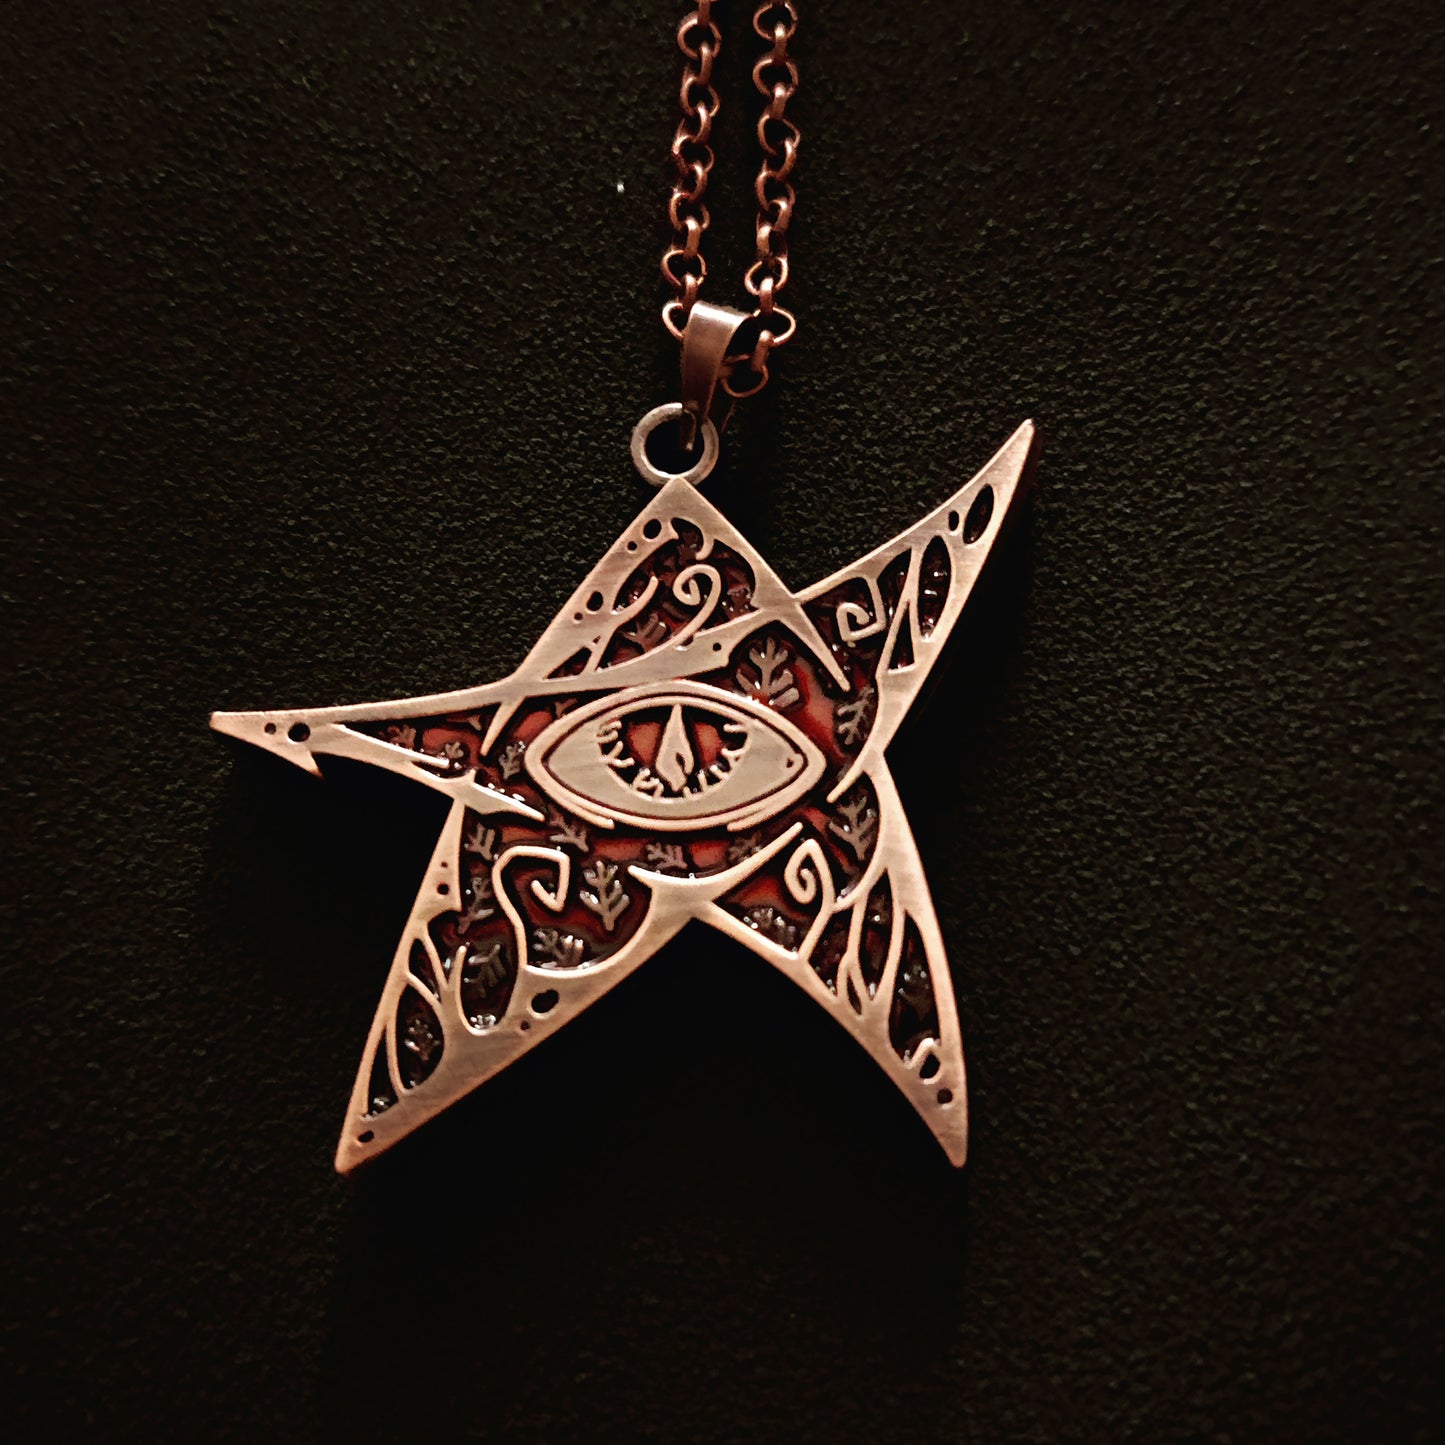 The Elder Sign of Cthulhu Necklace